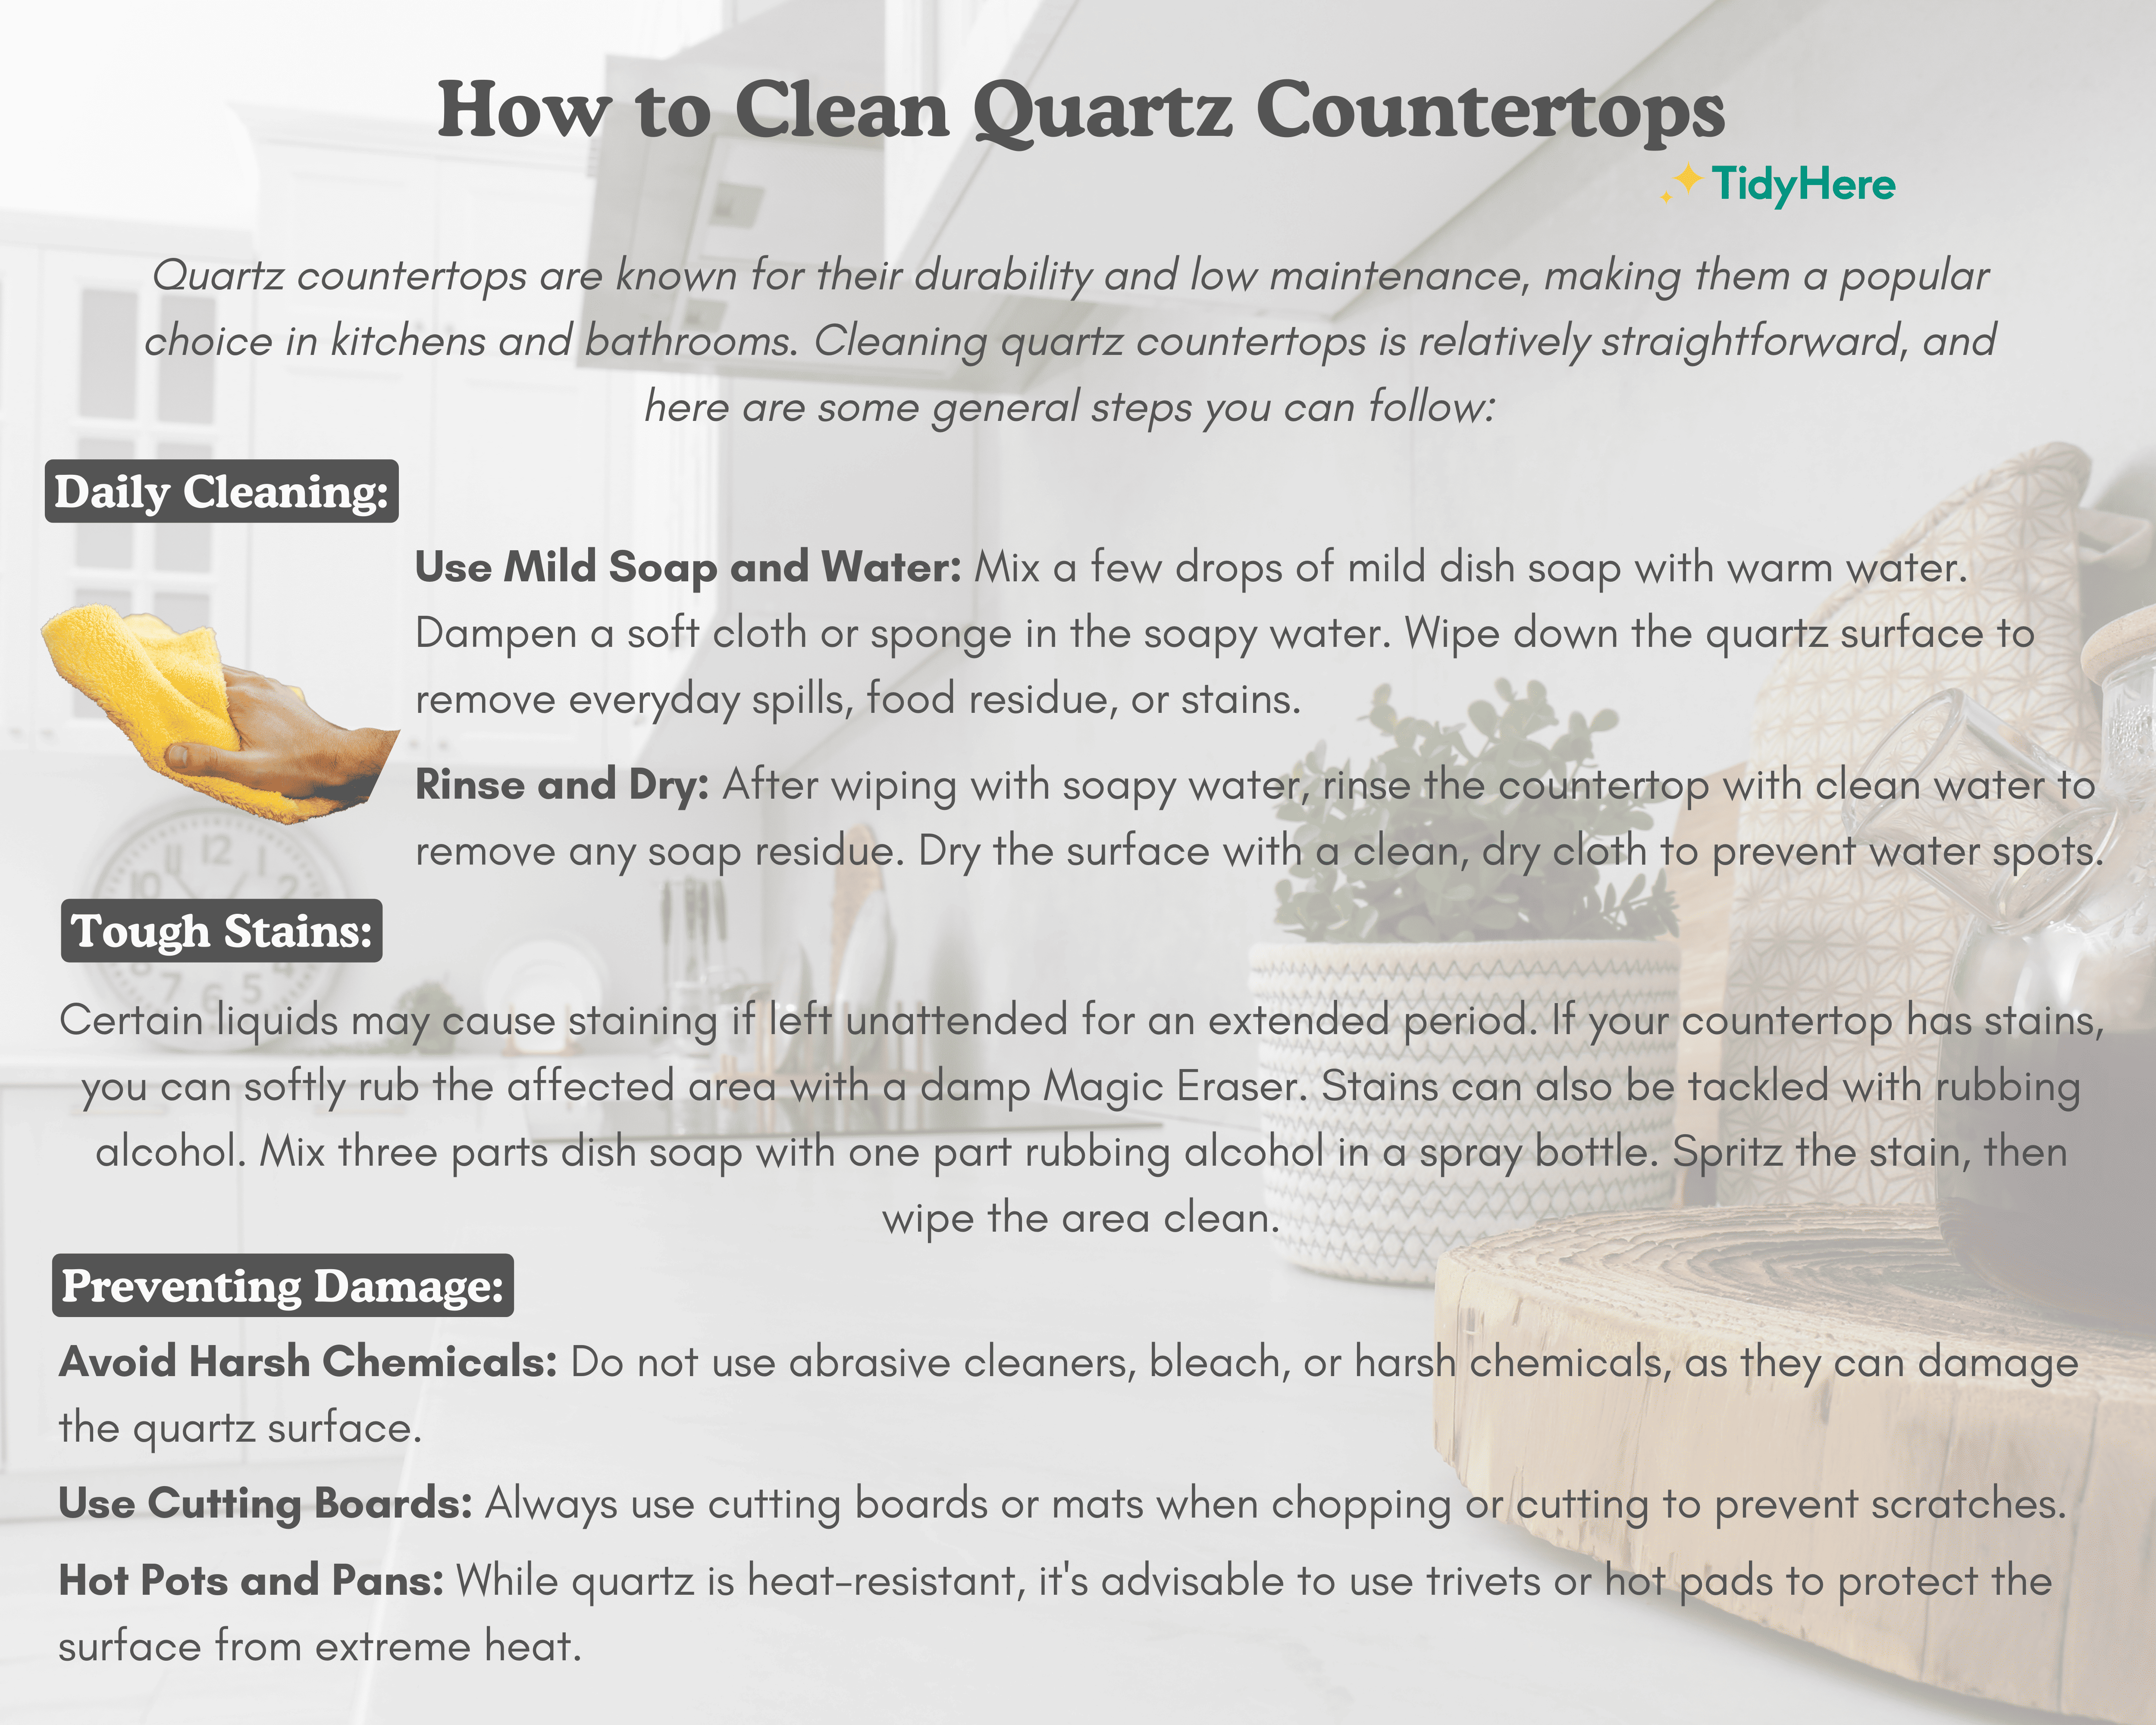 How to Clean Quartz Countertops Tidyhere Infographic